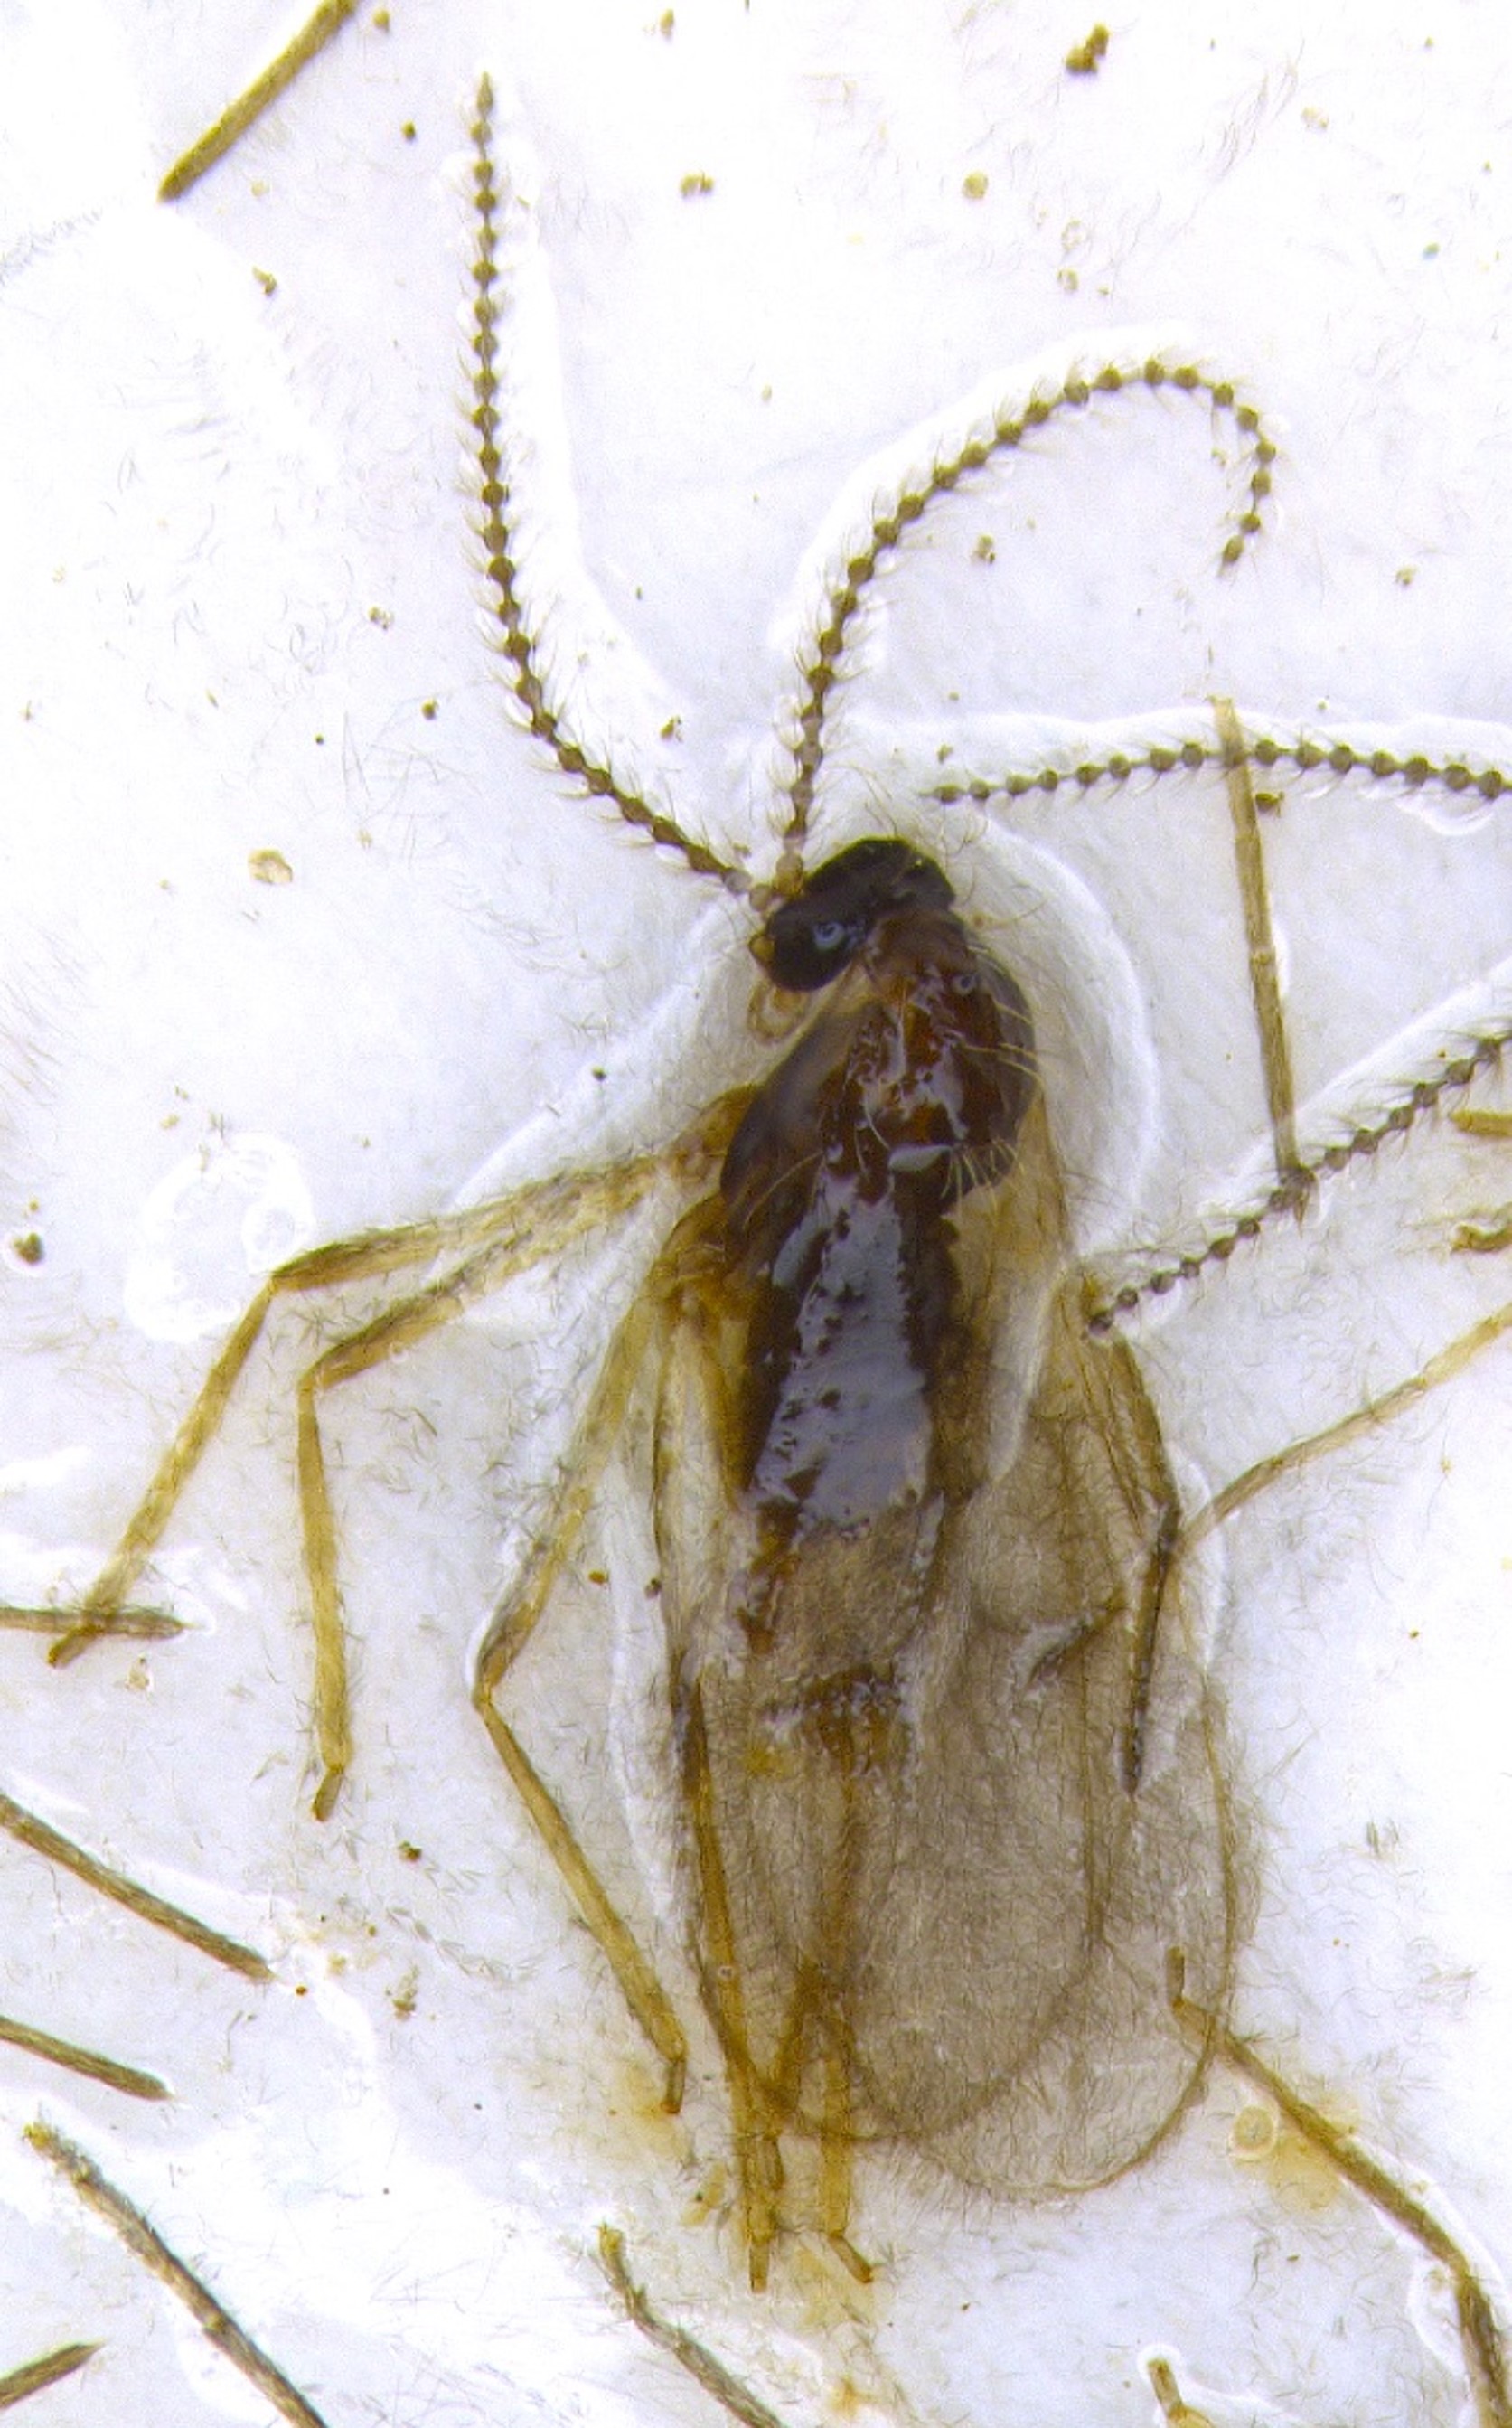 The adult canola flower midge is a small, nondescript brown fly. (NDSU photo)